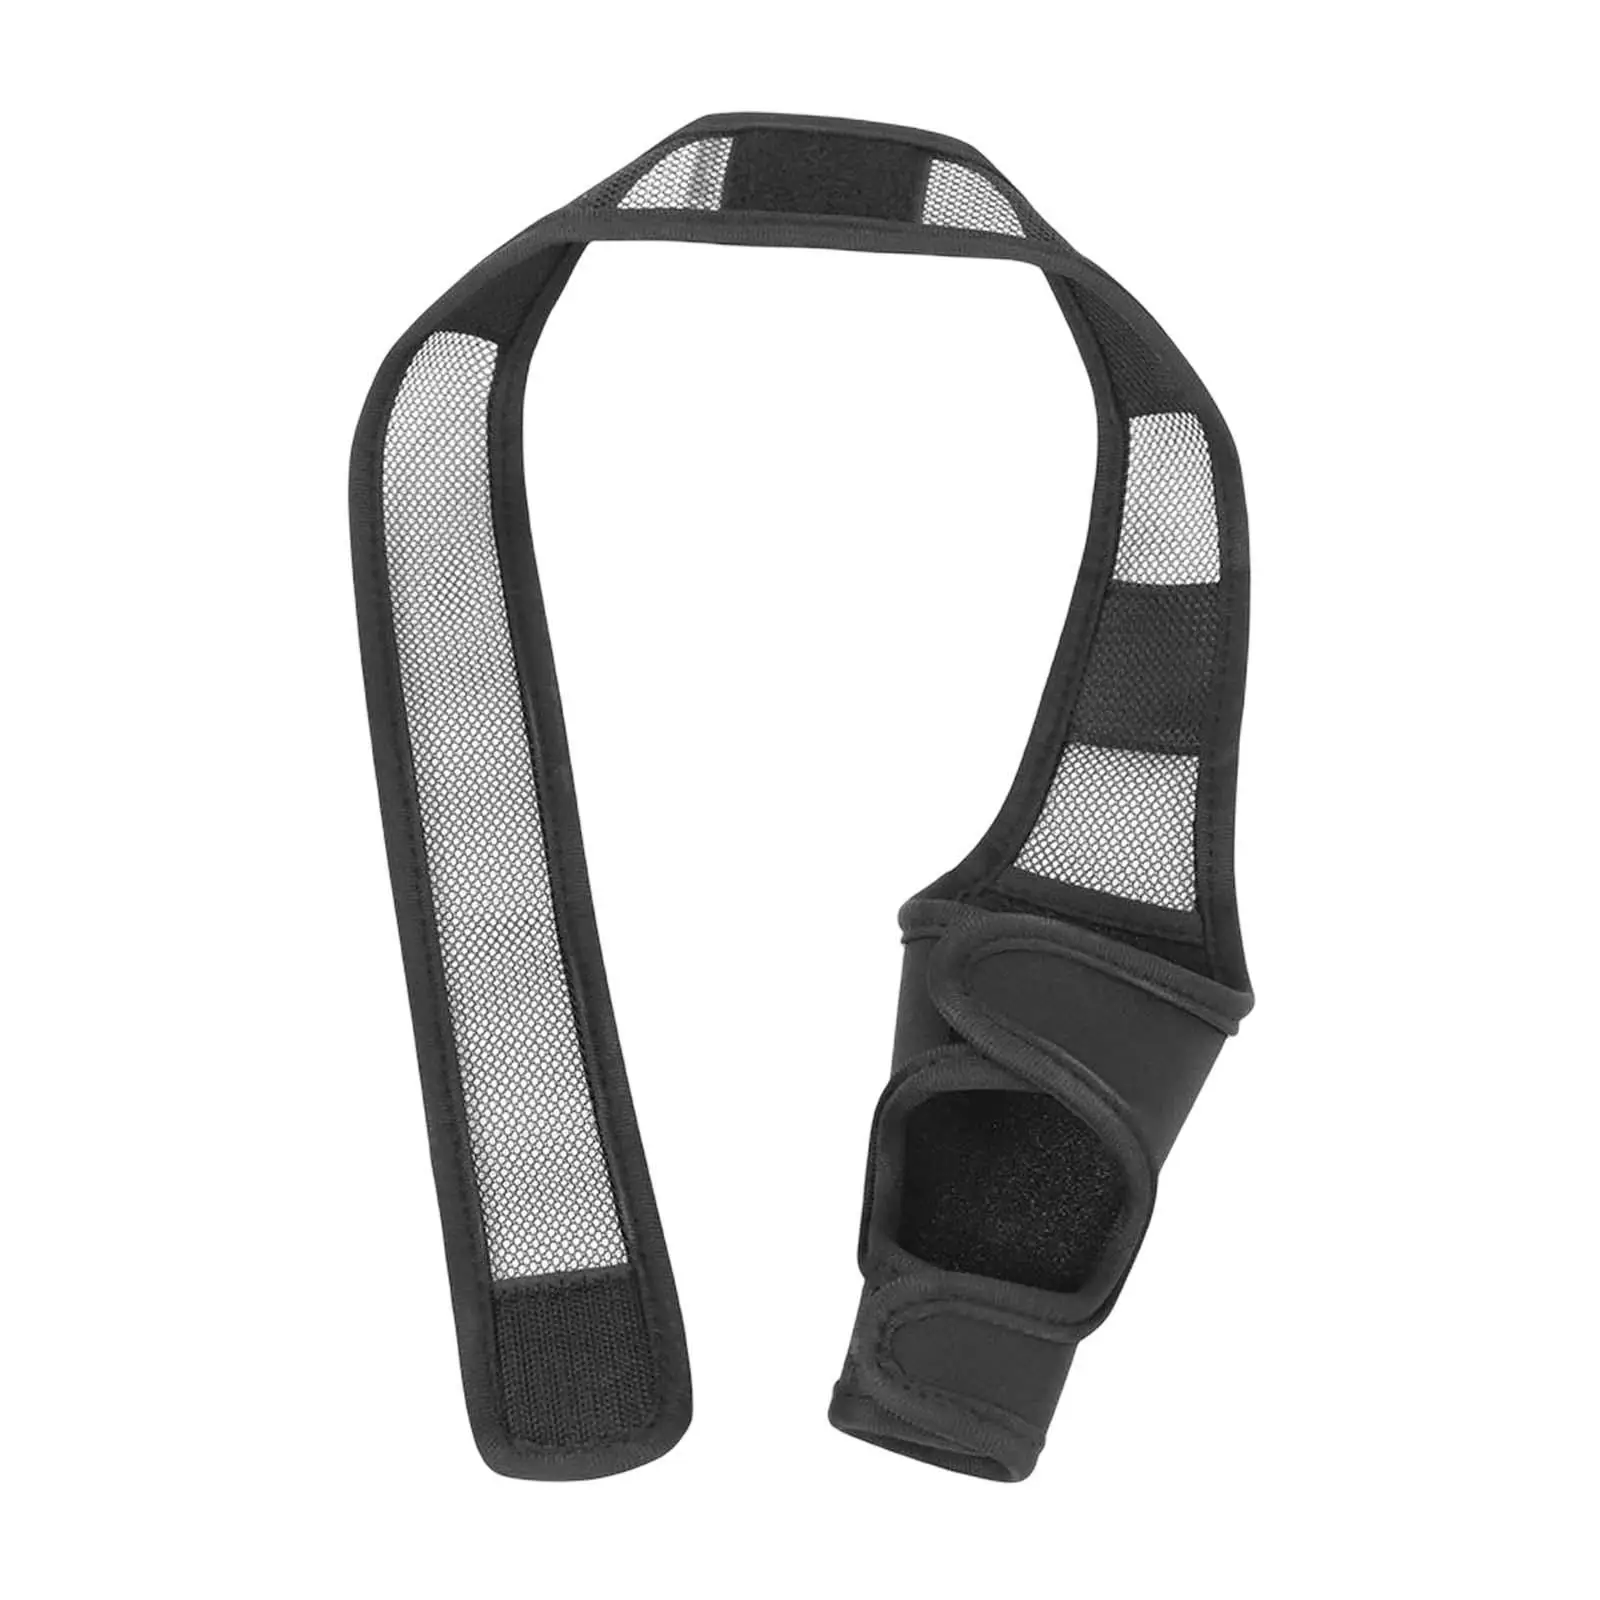 Dog Knee Brace Assist Band Breathable Joint Support for Muscle Sore Cruciate Ligament Injuries Patella Dislocation Rear Legs